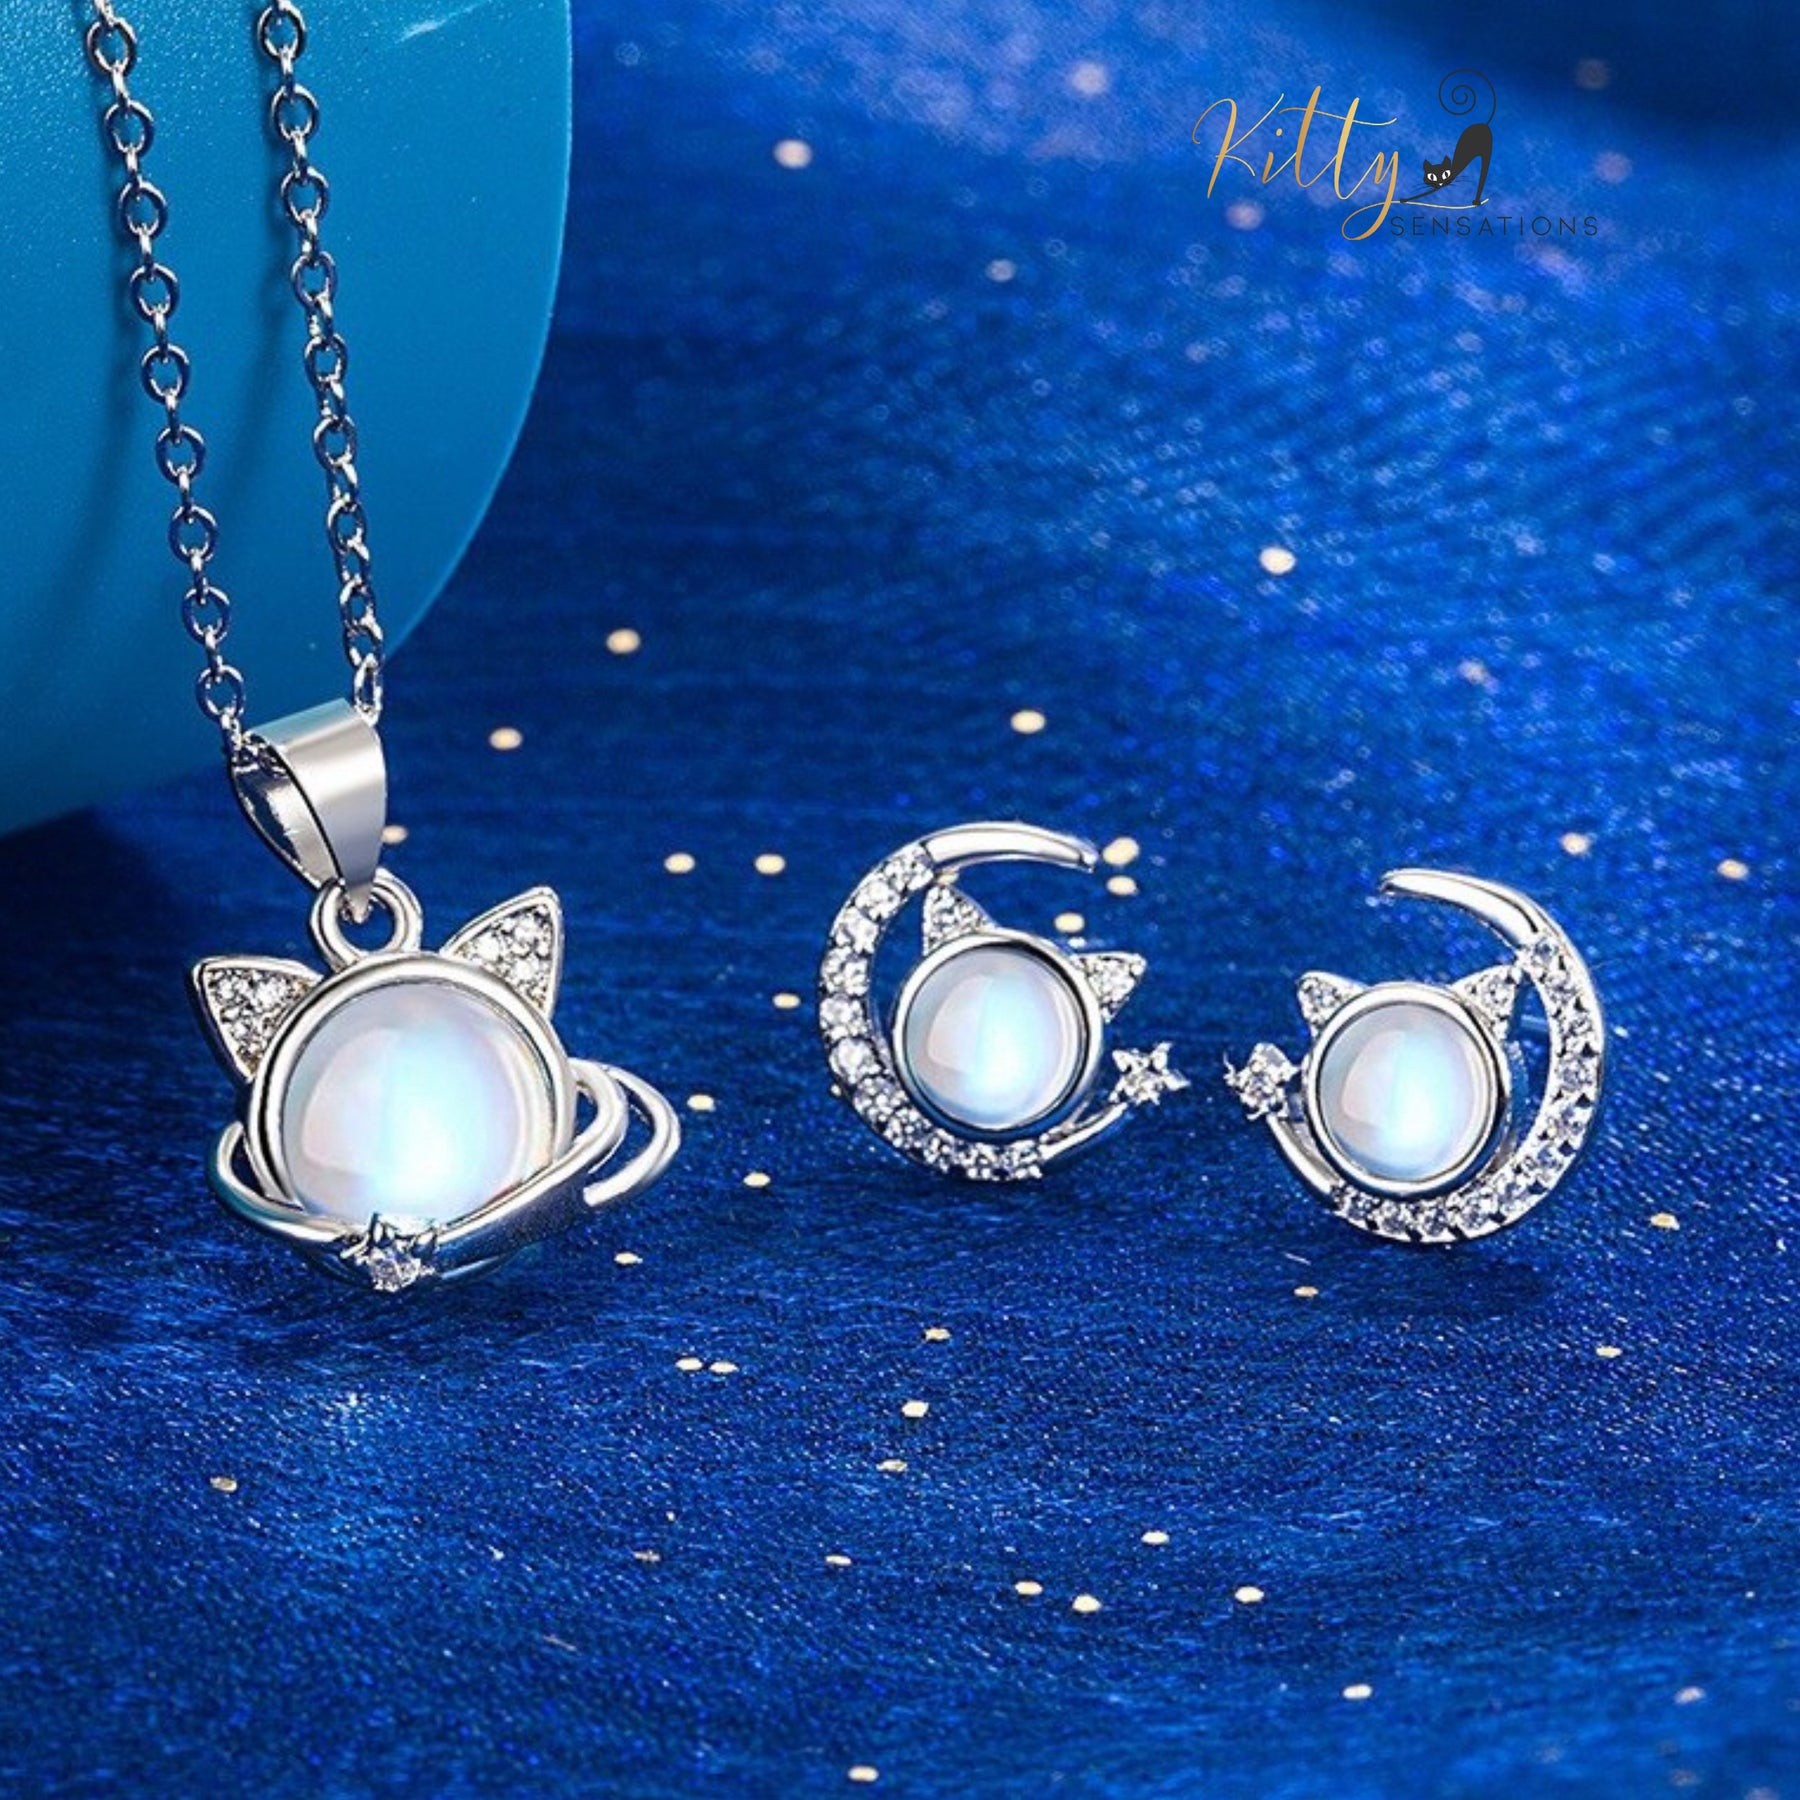 www.KittySensations.com: Cosmic Crystal Cat Jewelry Set in Solid 925 Sterling Silver and CZ ($33.95): https://www.kittysensations.com/products/cosmic-crystal-cat-jewelry-set-in-solid-925-sterling-silver